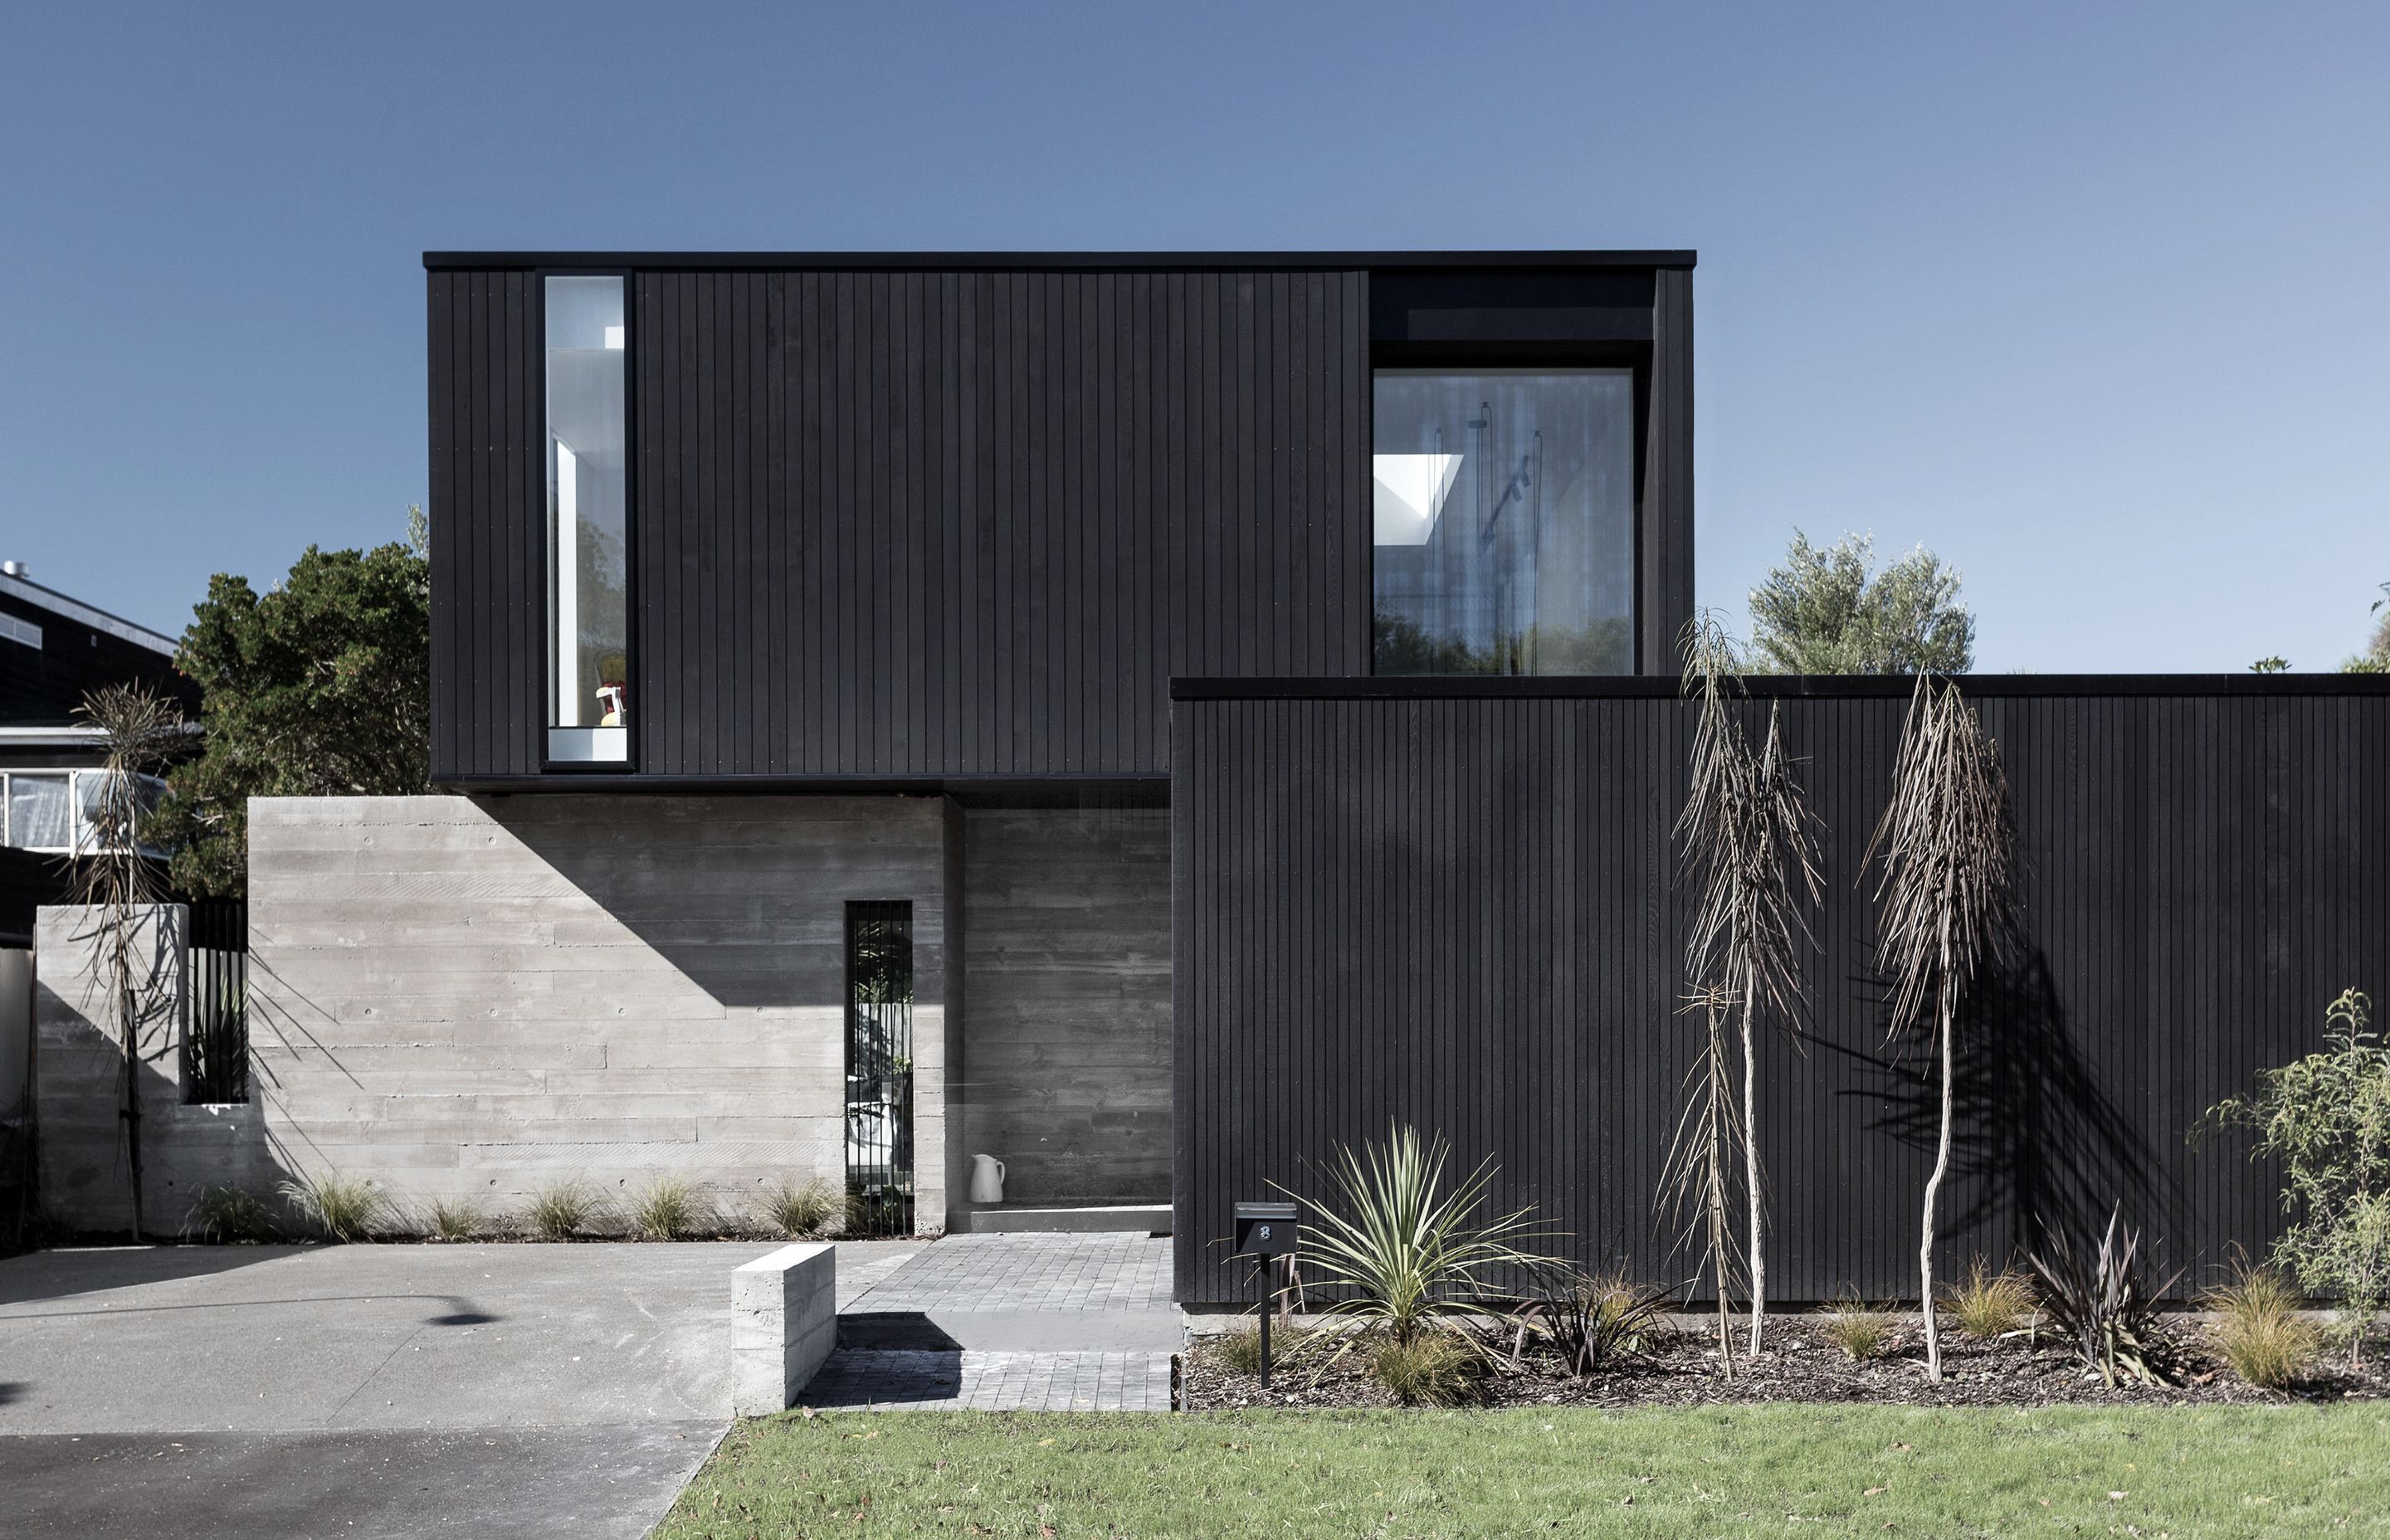 Churchill is comprised of a black cedar-clad box lightly resting over two in-situ concrete walls, with another black box out front forming the garage and boundary fence.